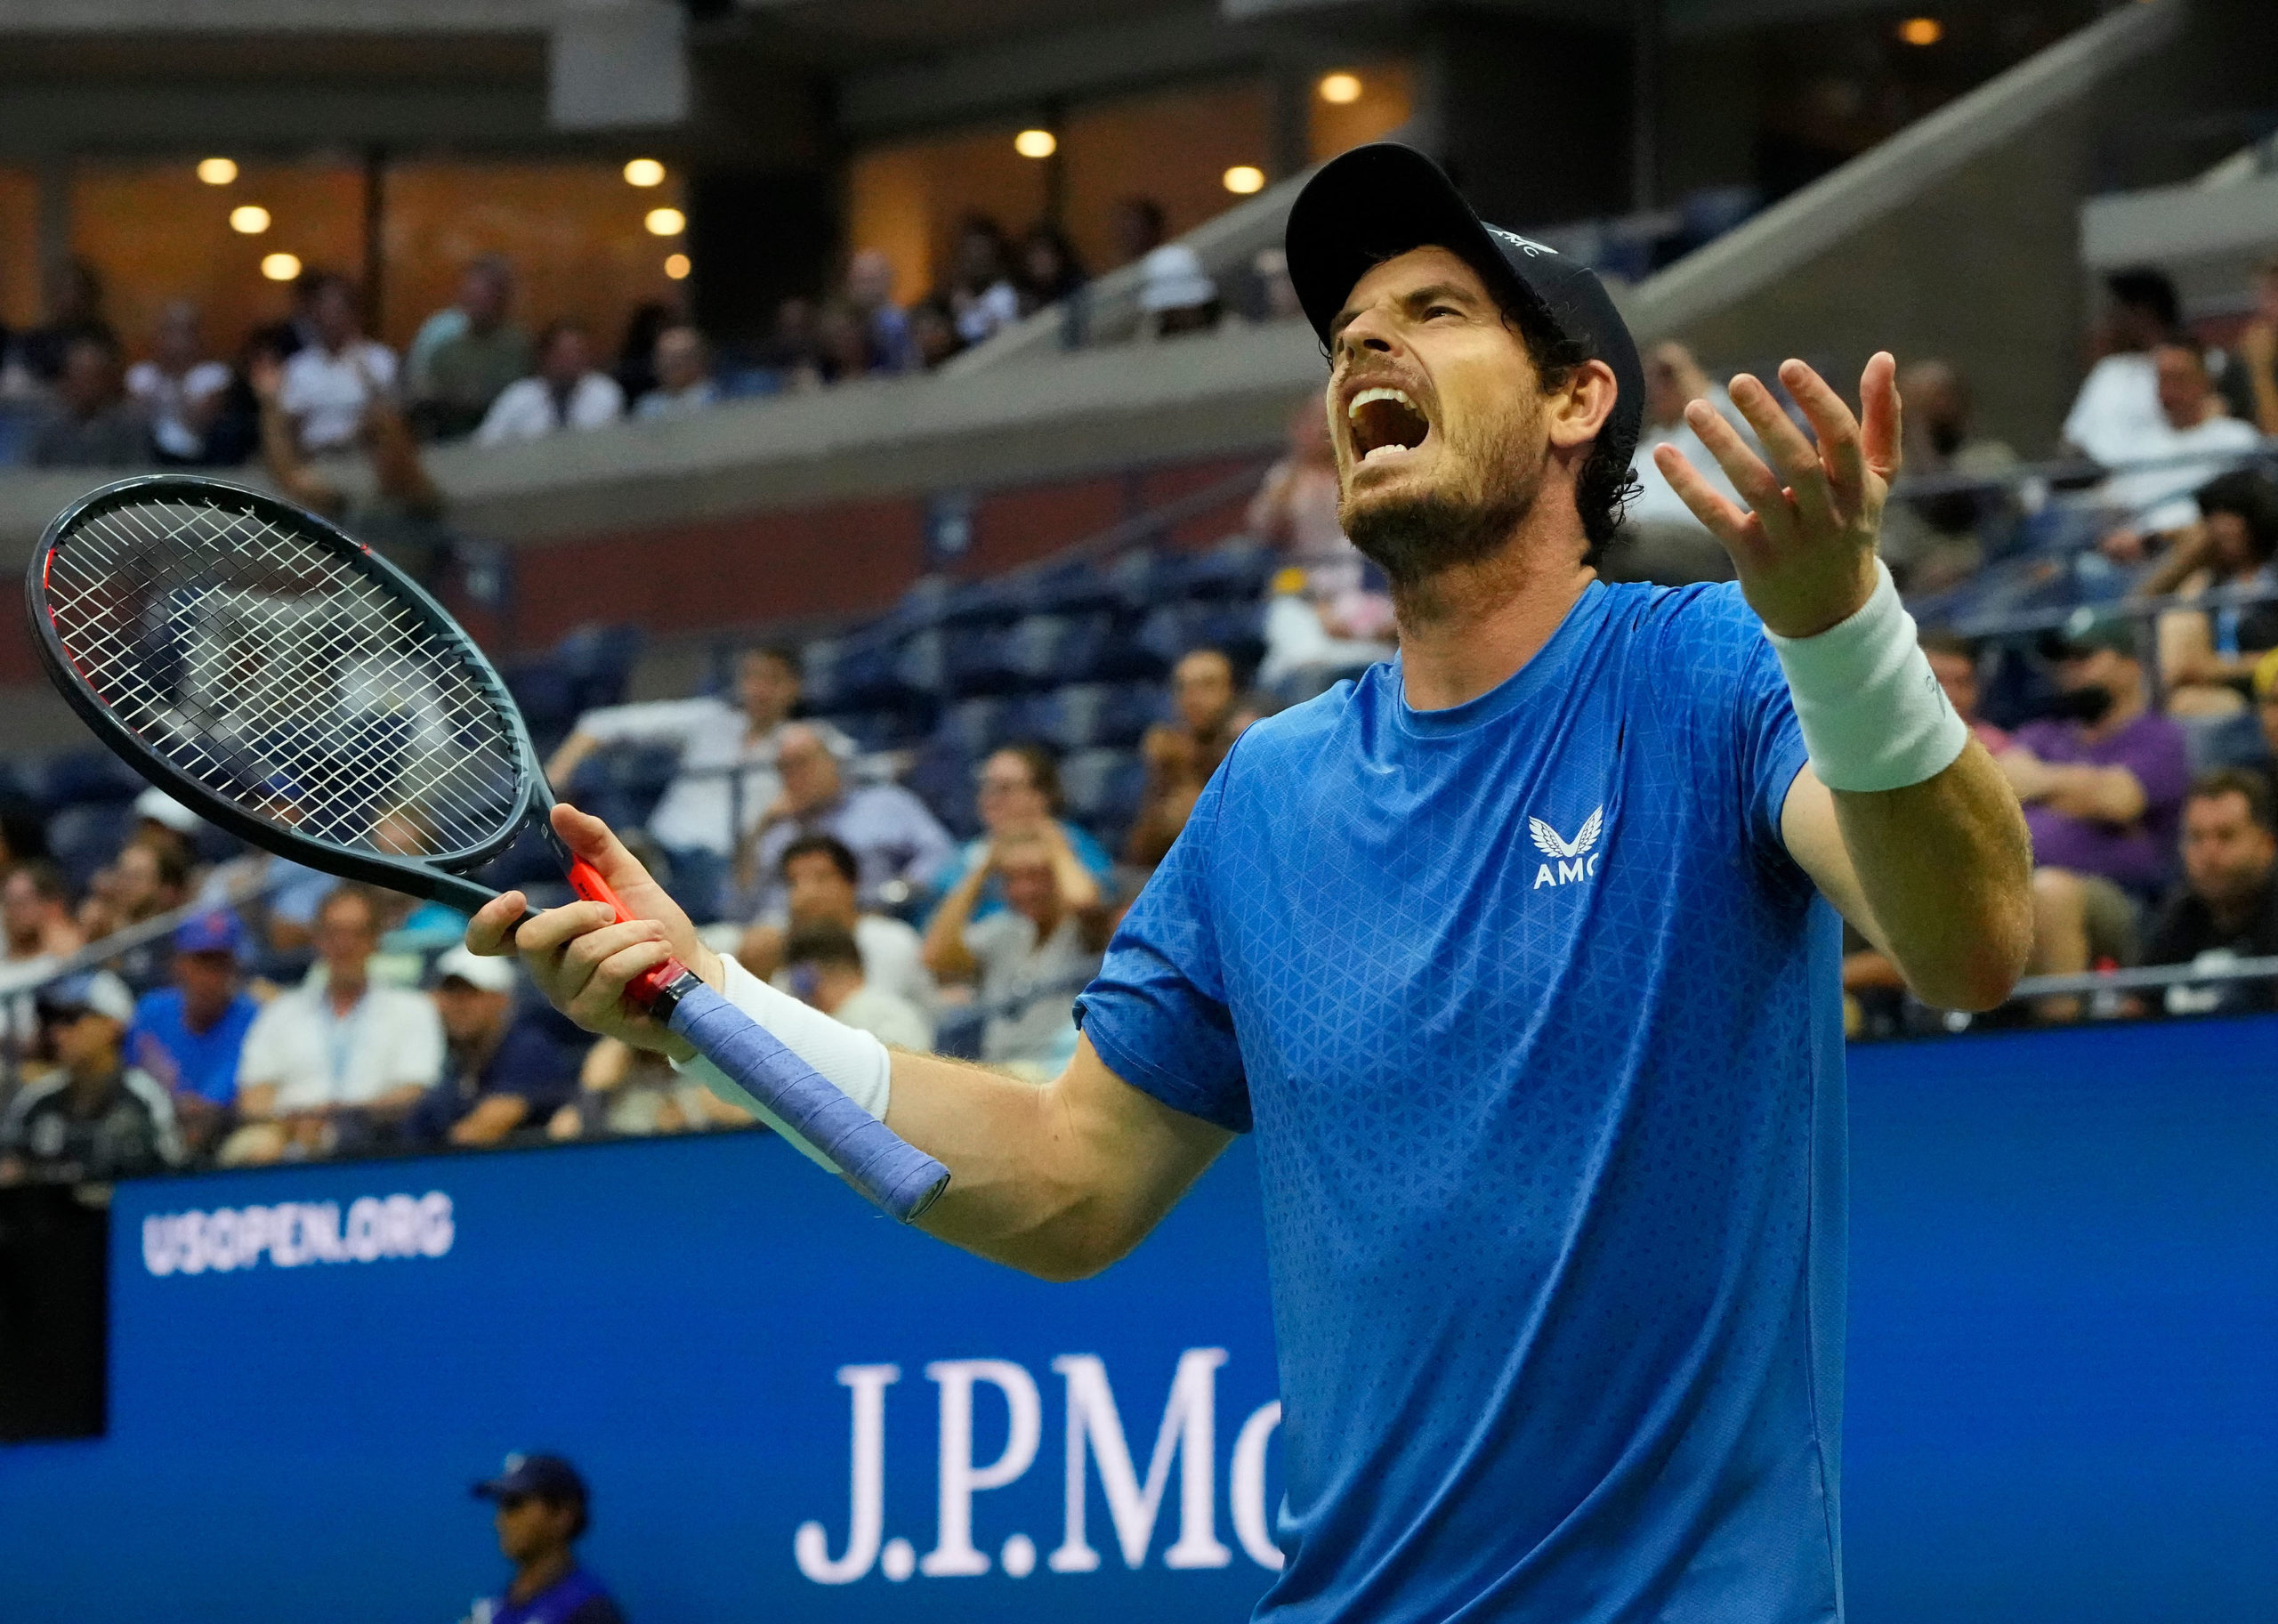 Andy Murray of Great Britain after a 5th set miss to Stefanos Tsitsipas of Greece on day one of the 2021 U.S. Open tennis tournament at USTA Billie King National Tennis Center